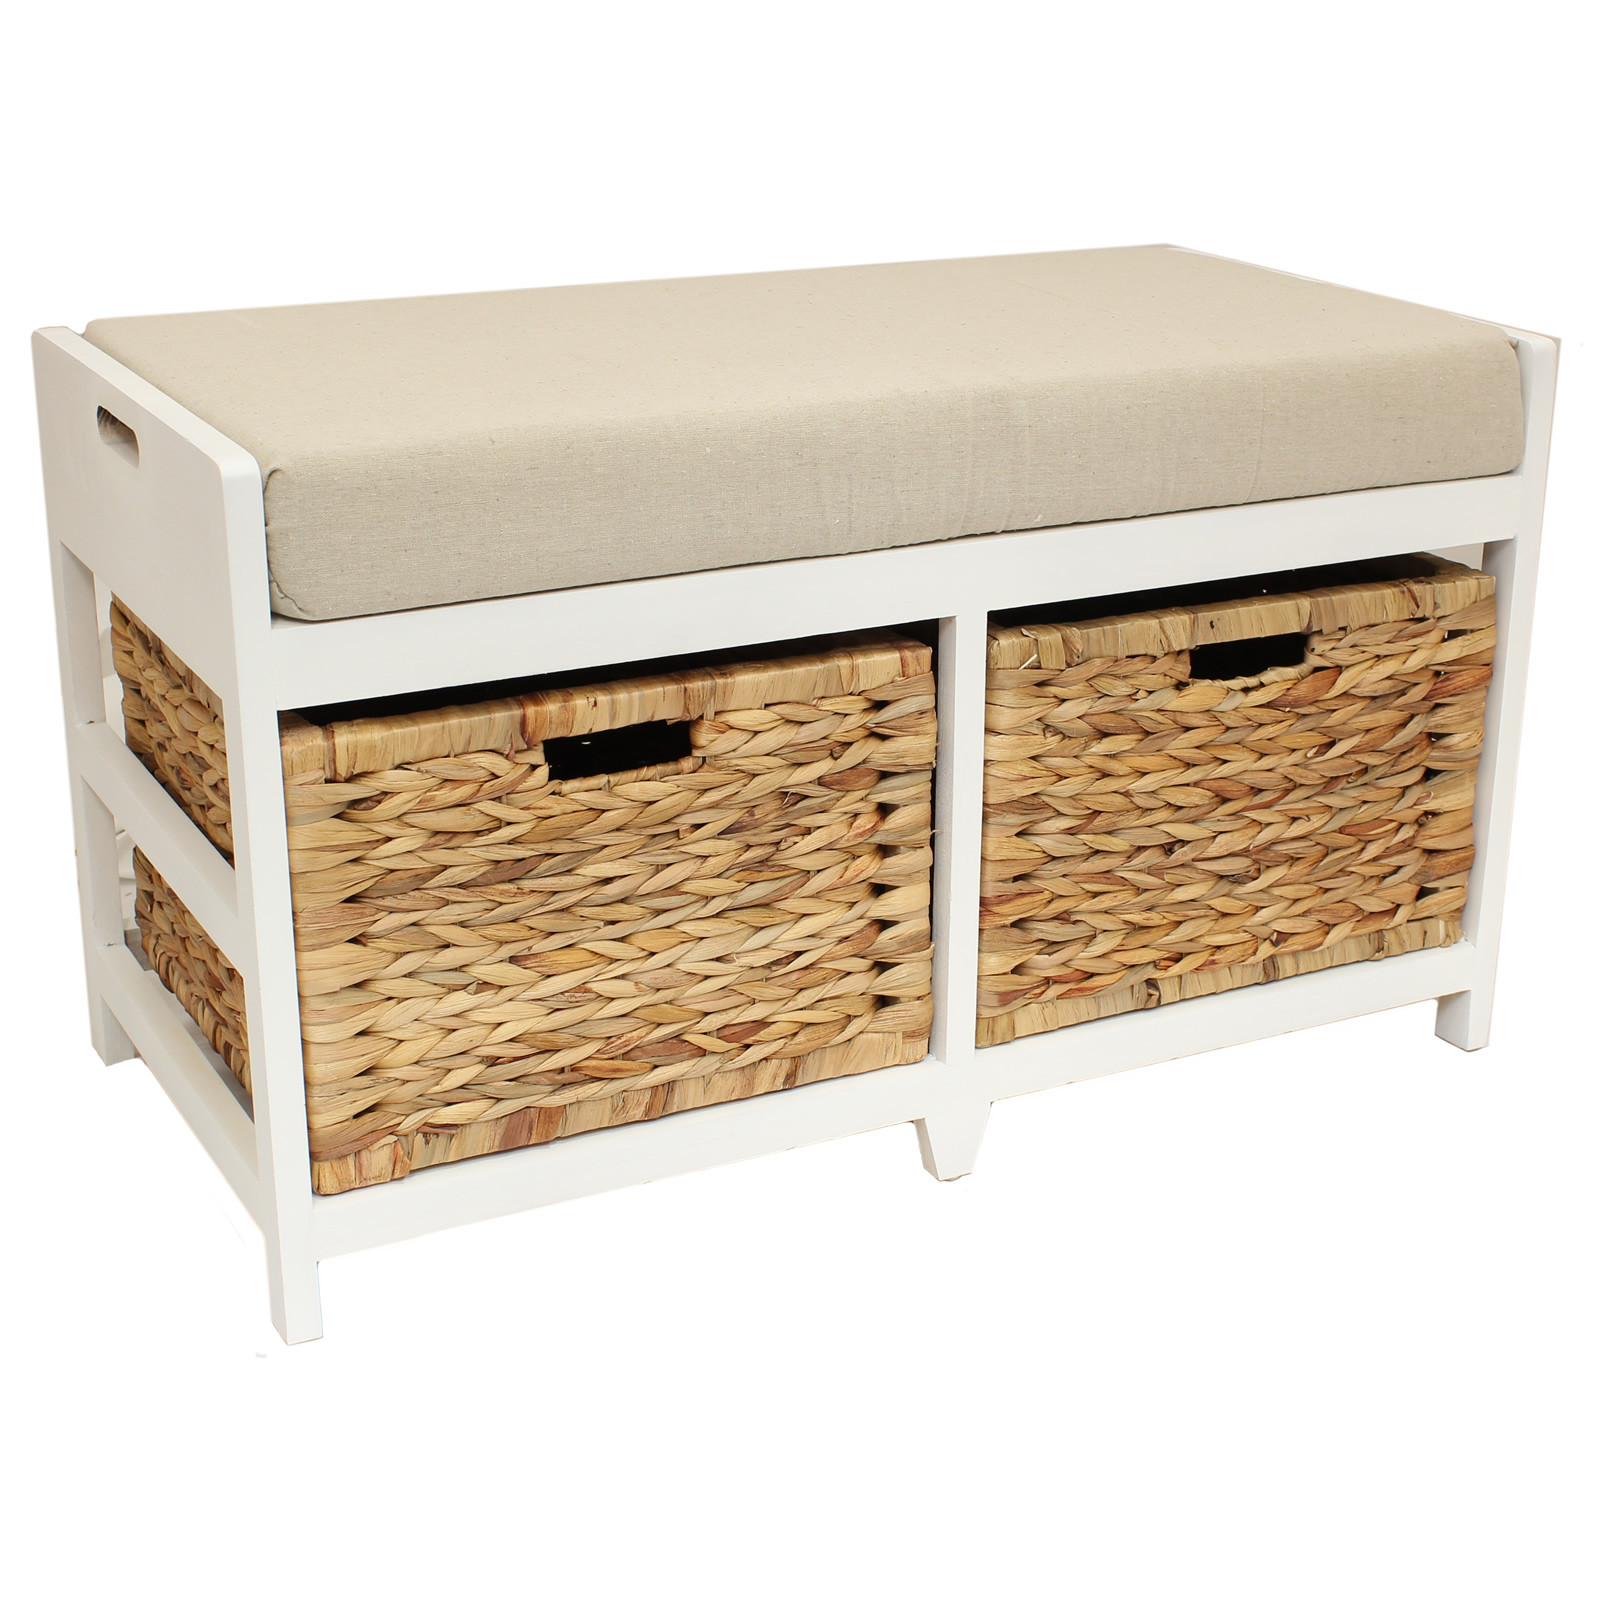 Seagrass Storage Bench
 HOME HALLWAY BATHROOM BENCH SEAT WITH SEAGRASS WICKER